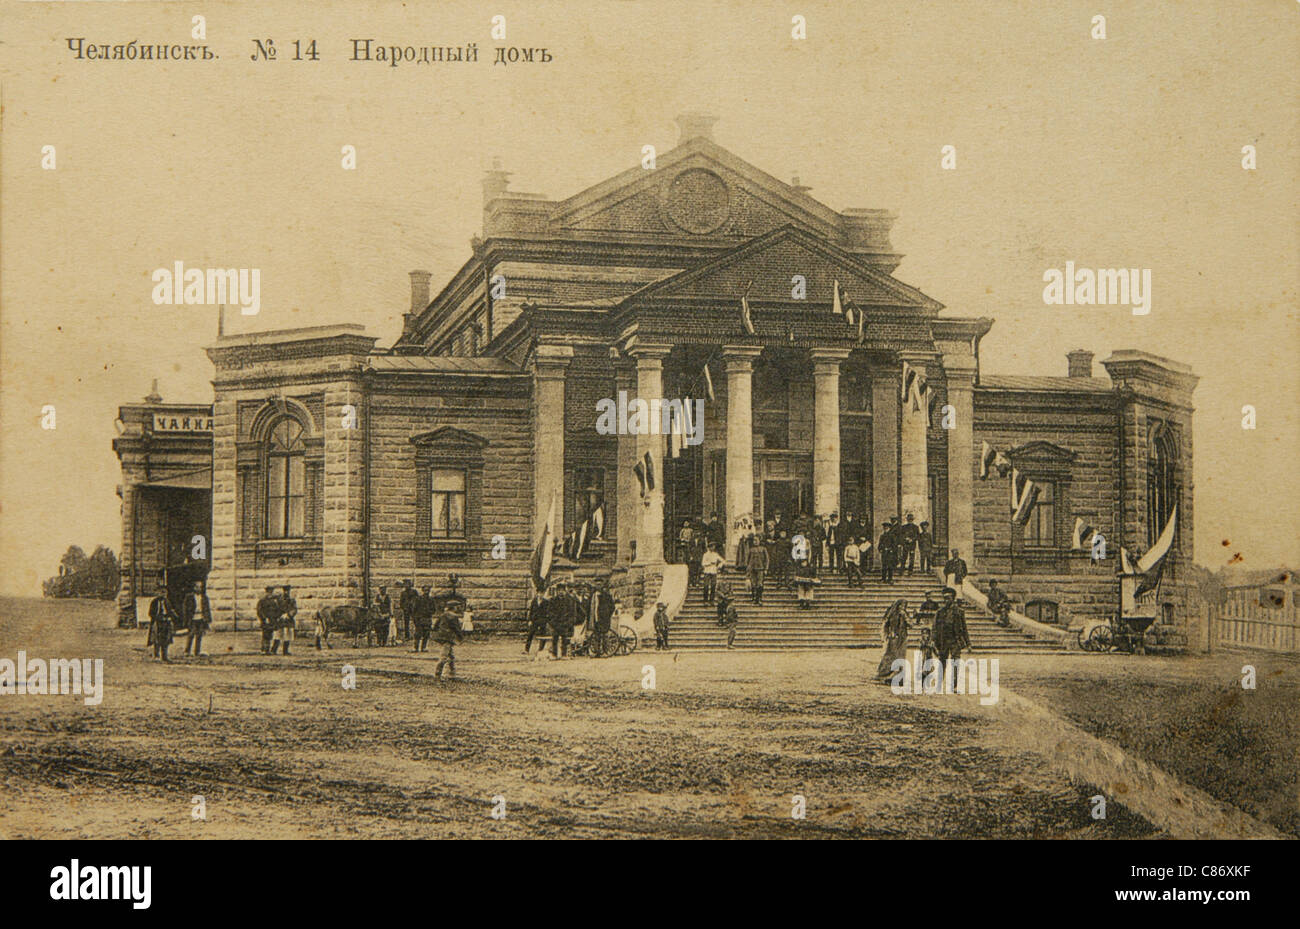 The People's House in Chelyabinsk, Russian Empire. Black and white vintage photograph by Russian photographer Veniamin Metenkov dated from the beginning of the 20th century issued in the Russian vintage postcard published by Veniamin Metenkov himself in Yekaterinburg. Text in Russian: Chelyabinsk. People's House. Courtesy of the Azoor Postcard Collection. Stock Photo